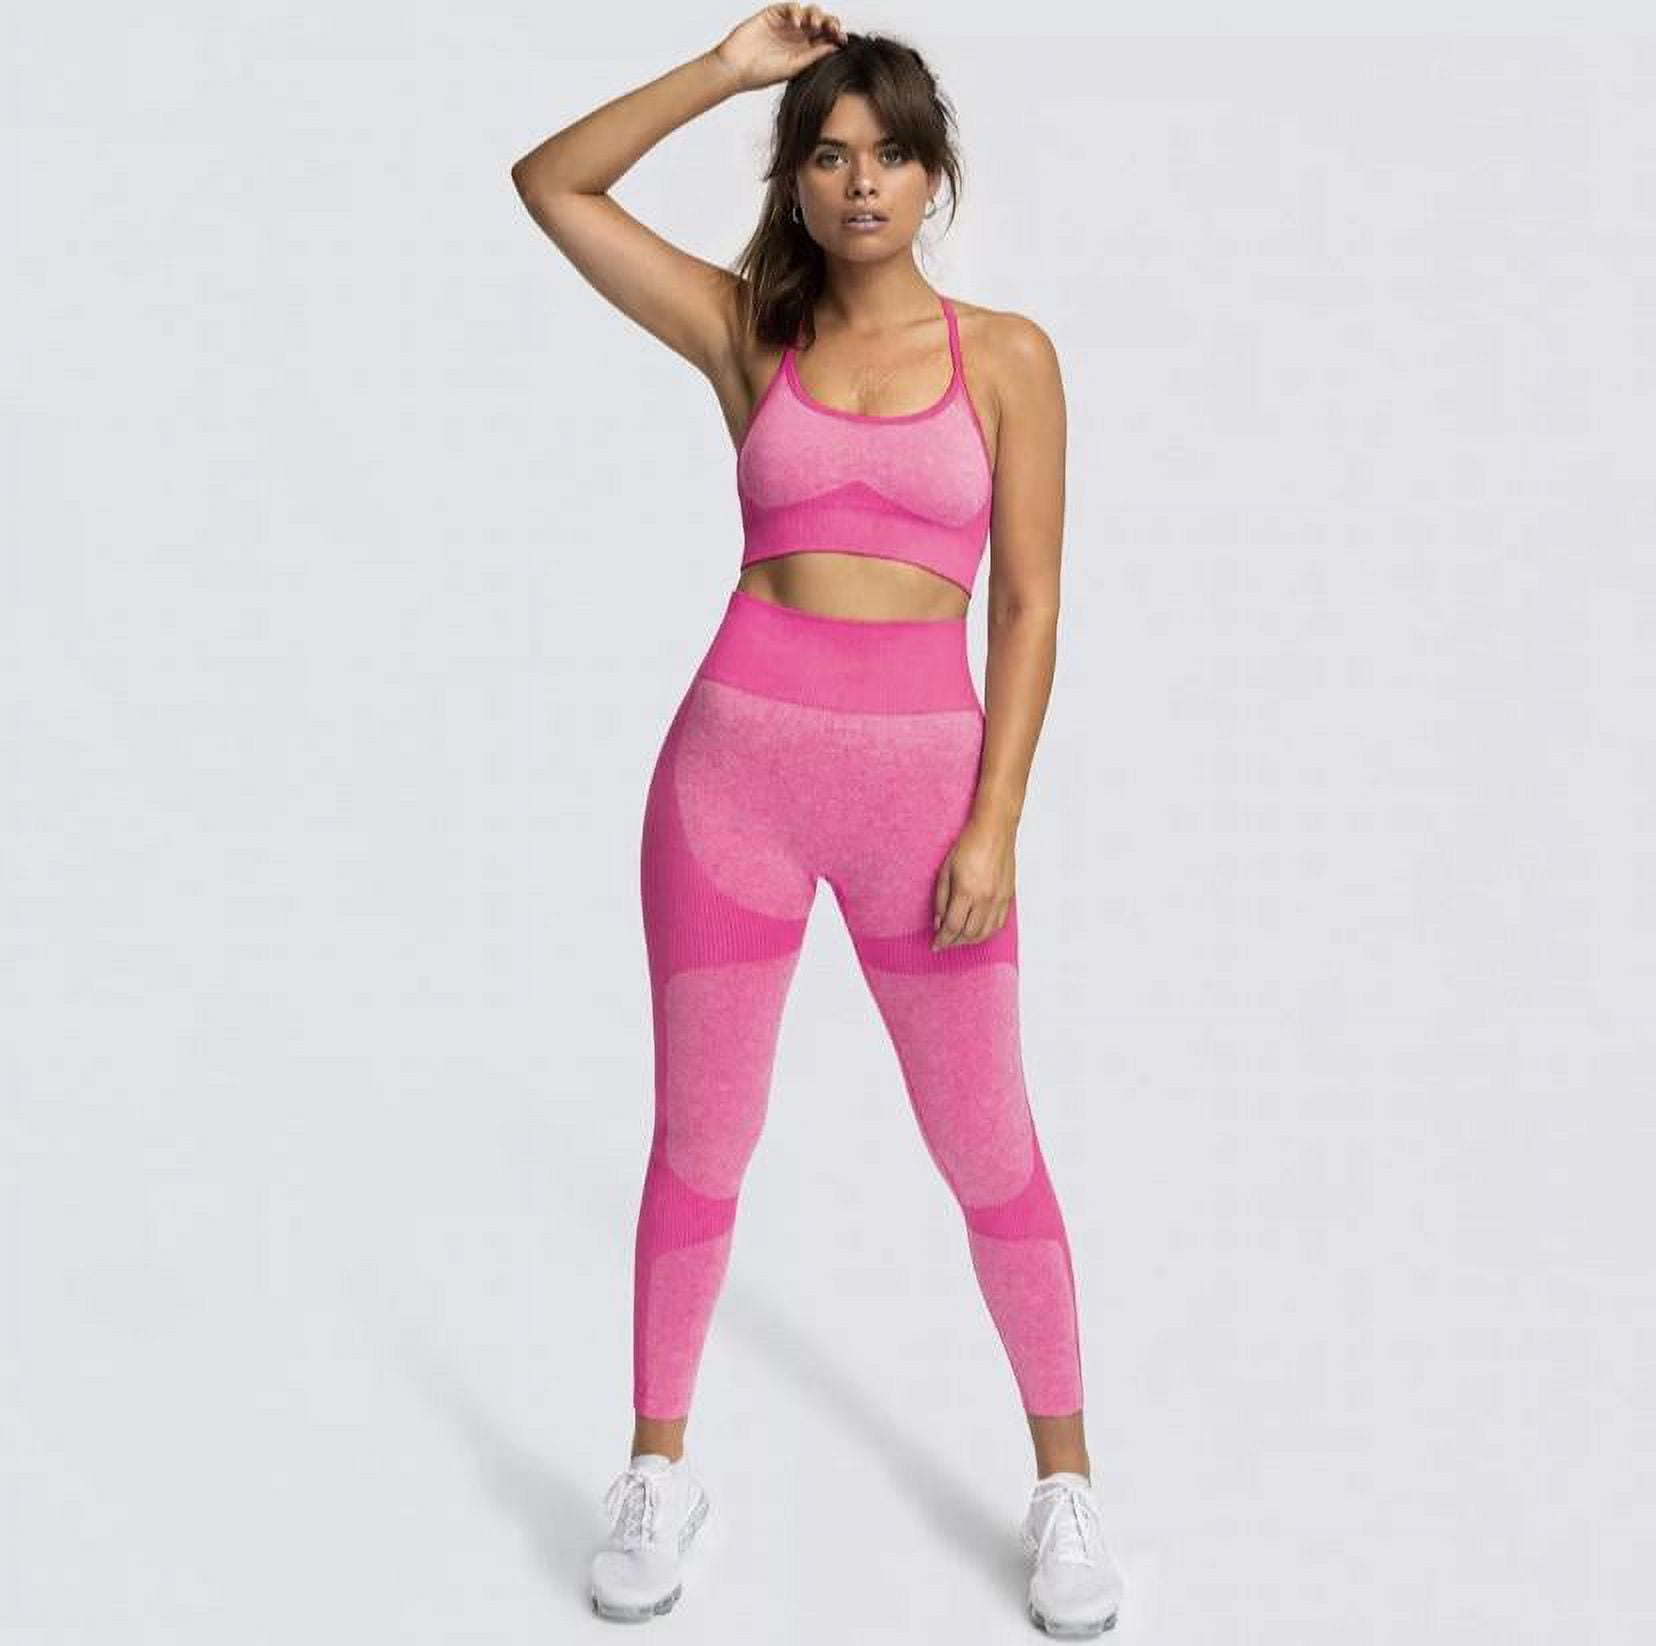 Women’s Athletic Two Piece Set Leggings And Top Yoga Workout Active Wear